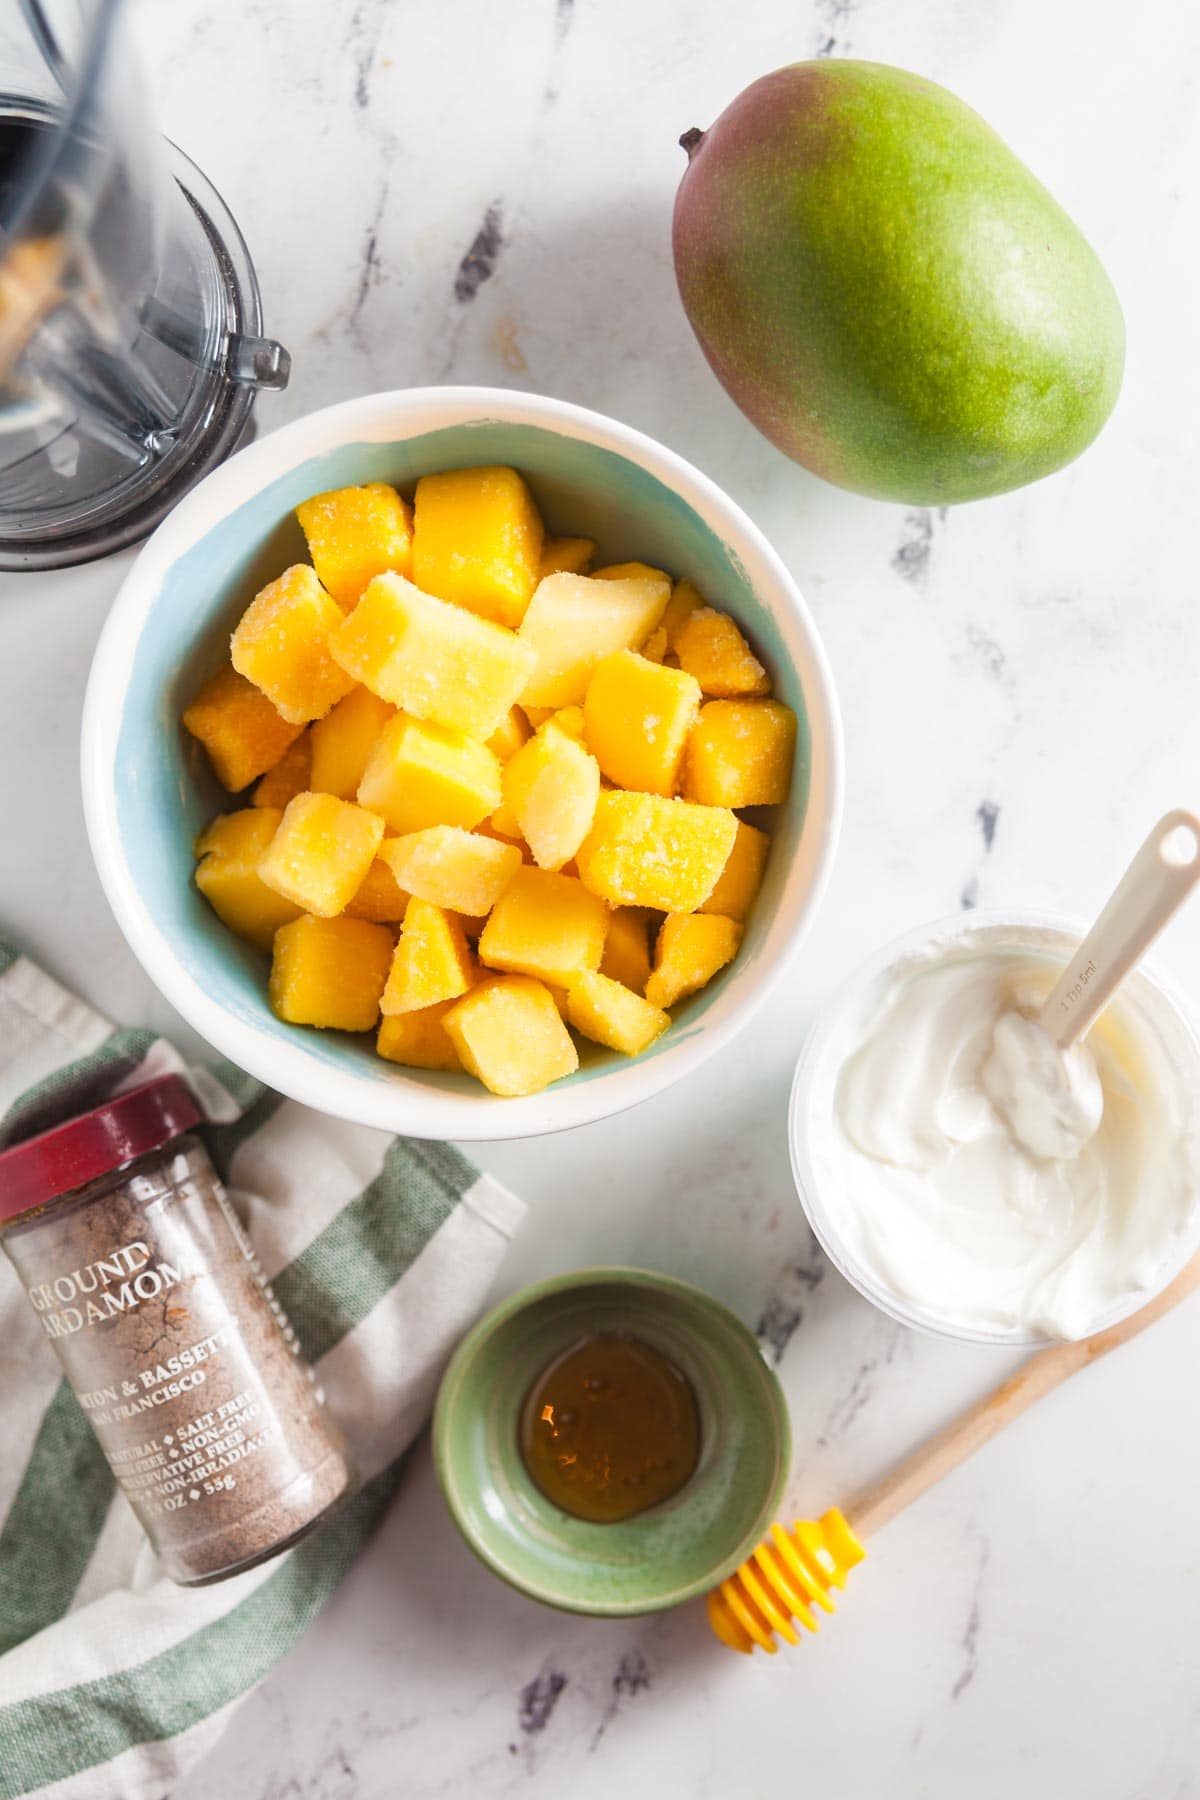 A flatlay image of ingredients needed ot make a mango lassi msoothie, arranged on a white countertop. Ingredients include frozen mango, yogurt, milk, and cardamom. 